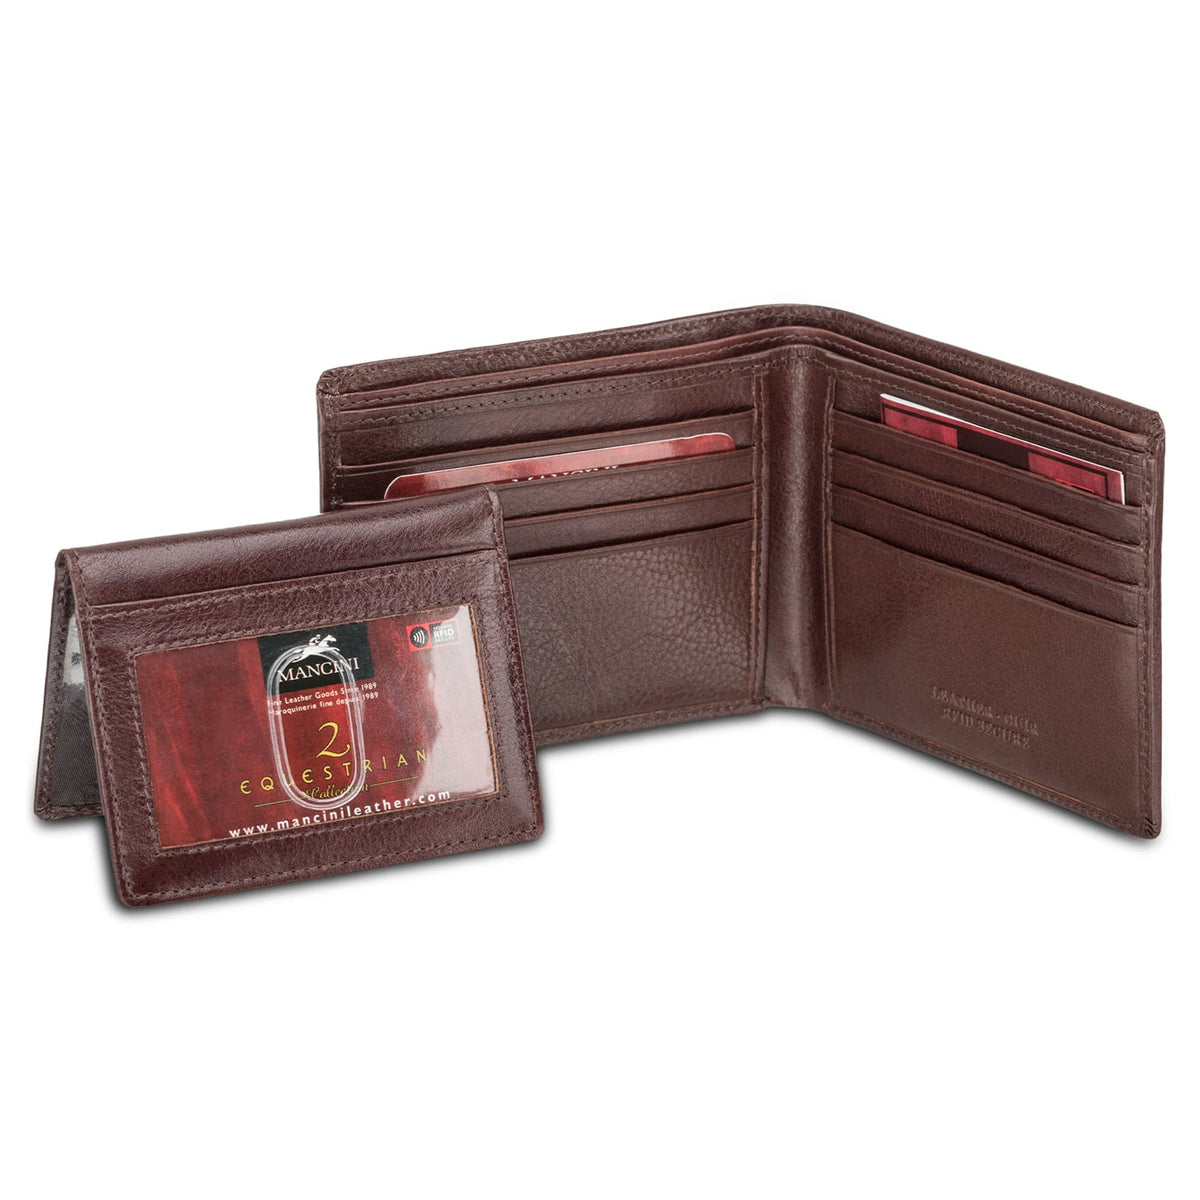 Mancini Equestrian-2 RFID Billfold with Removable Left Wing Passcase